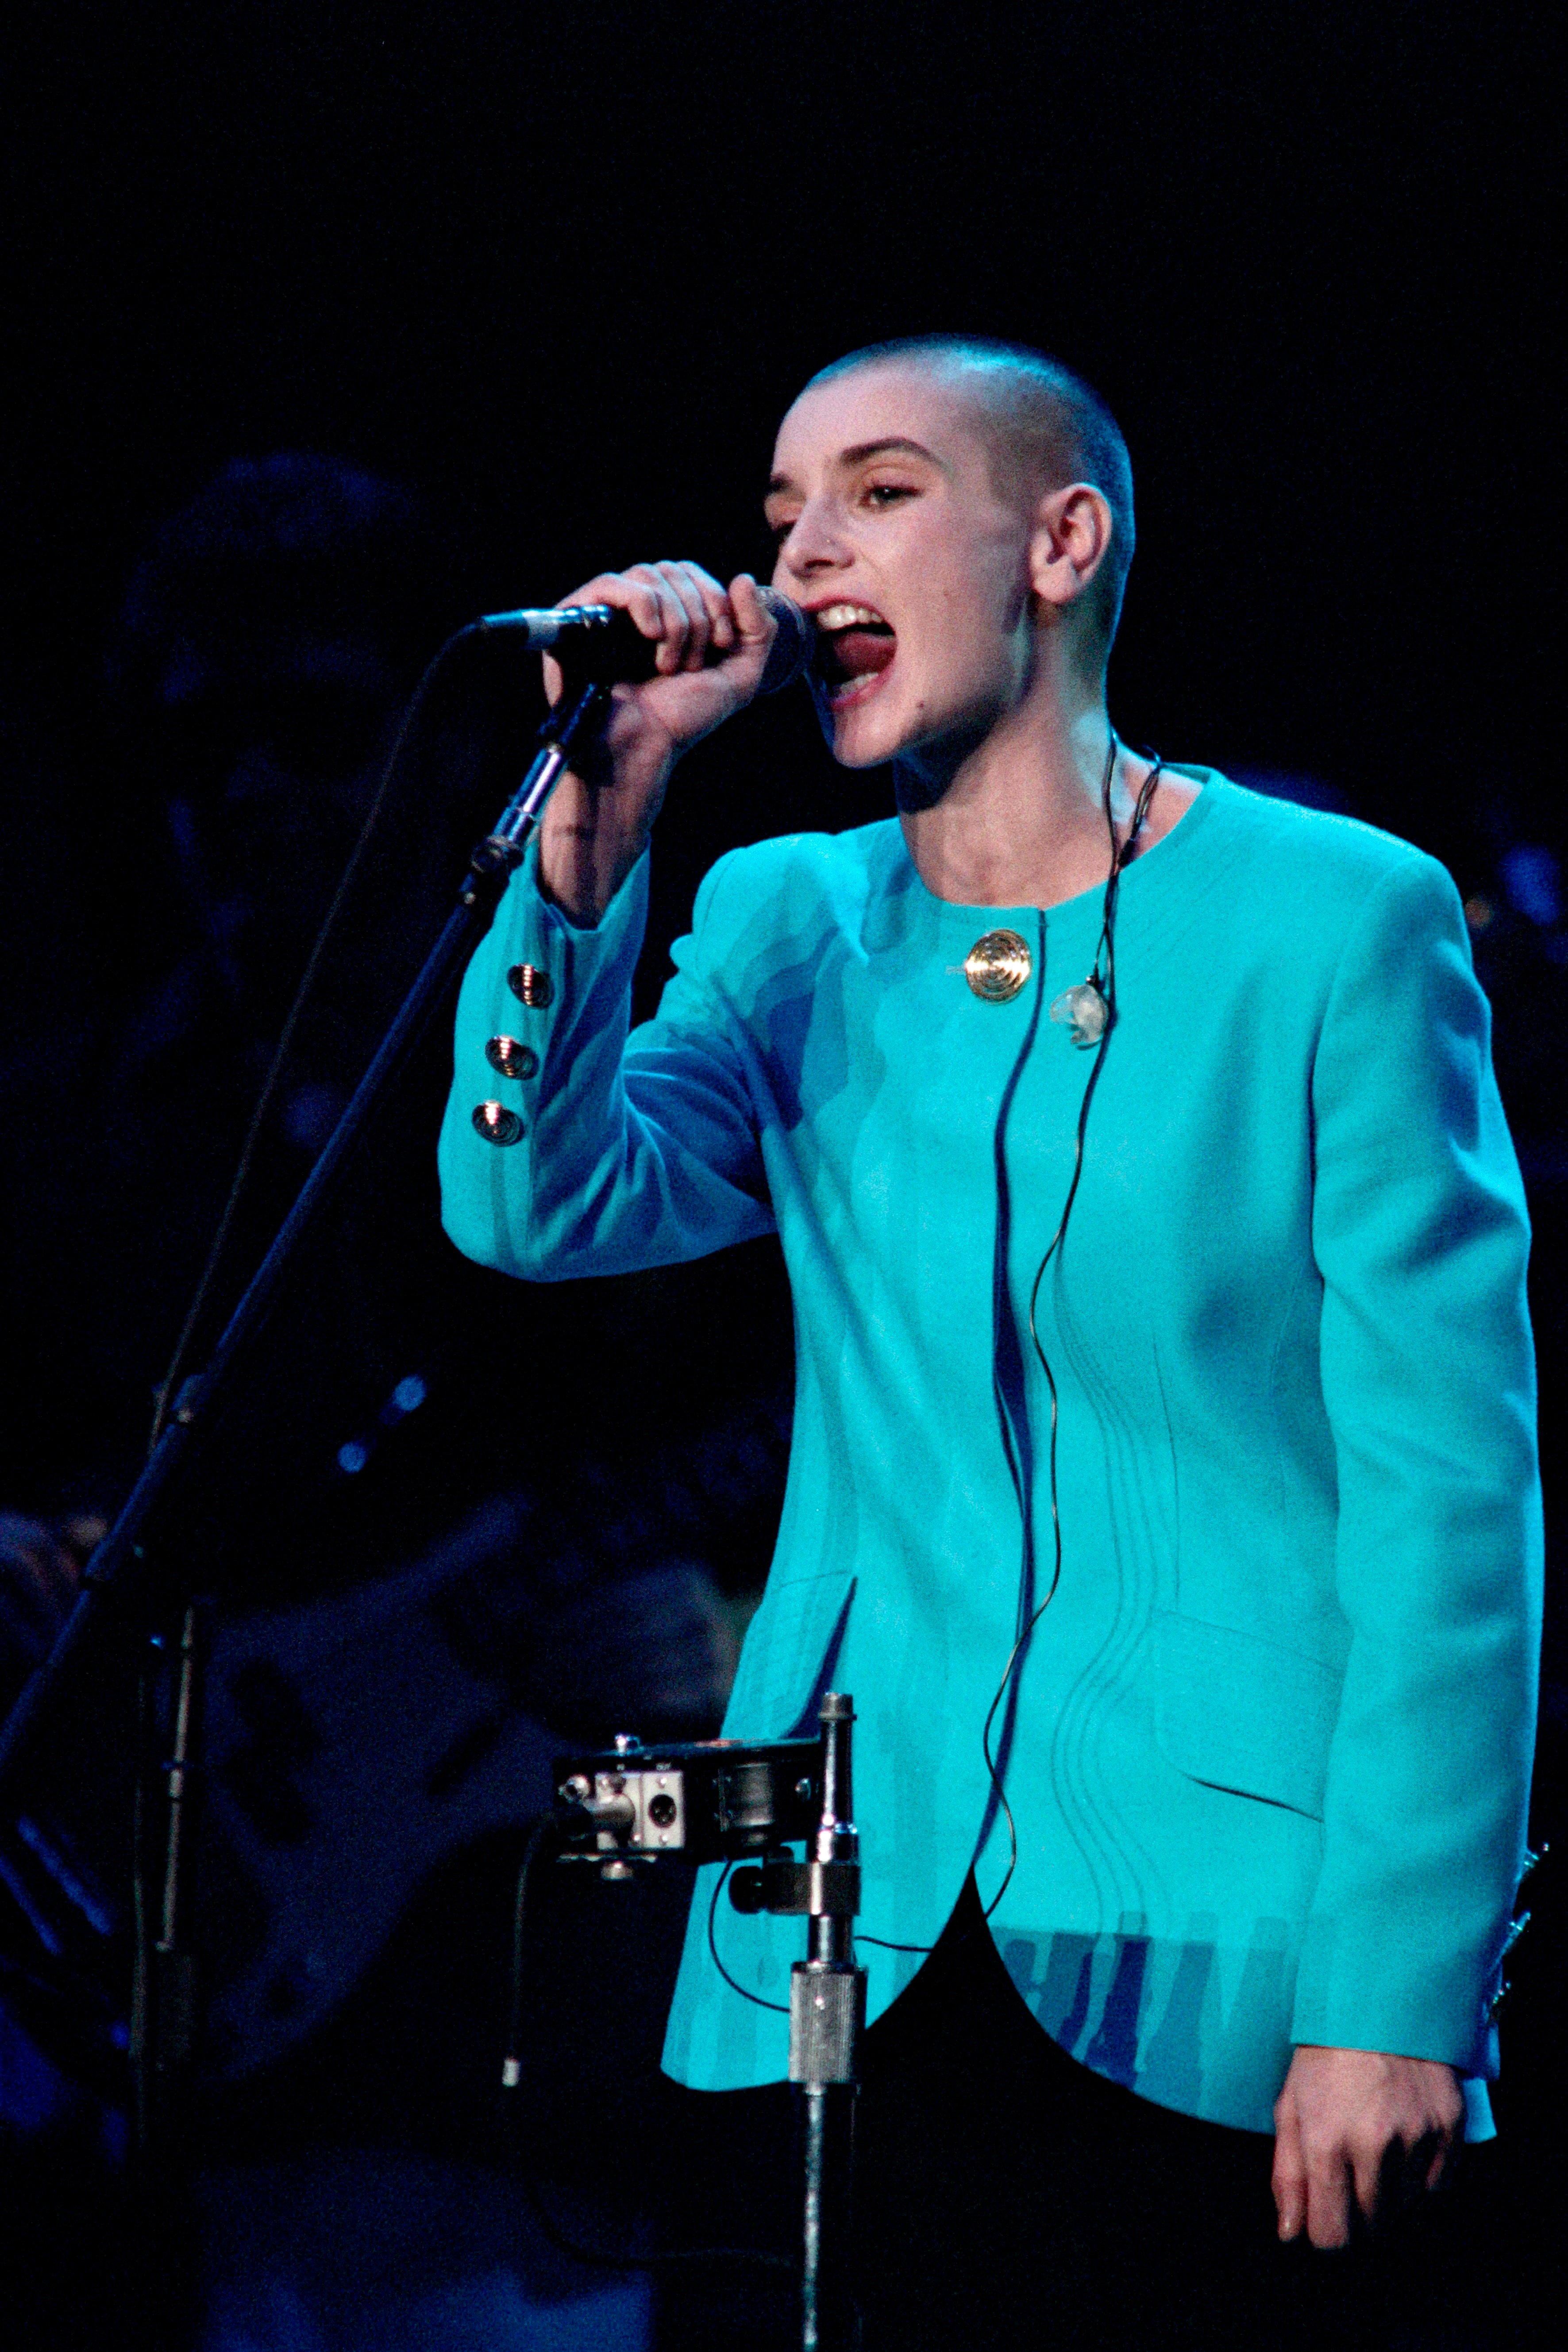 Irish singer Sinéad O'Connor performs at an all-star tribute for Bob Dylan in New York City's Madison Square Garden, 1992